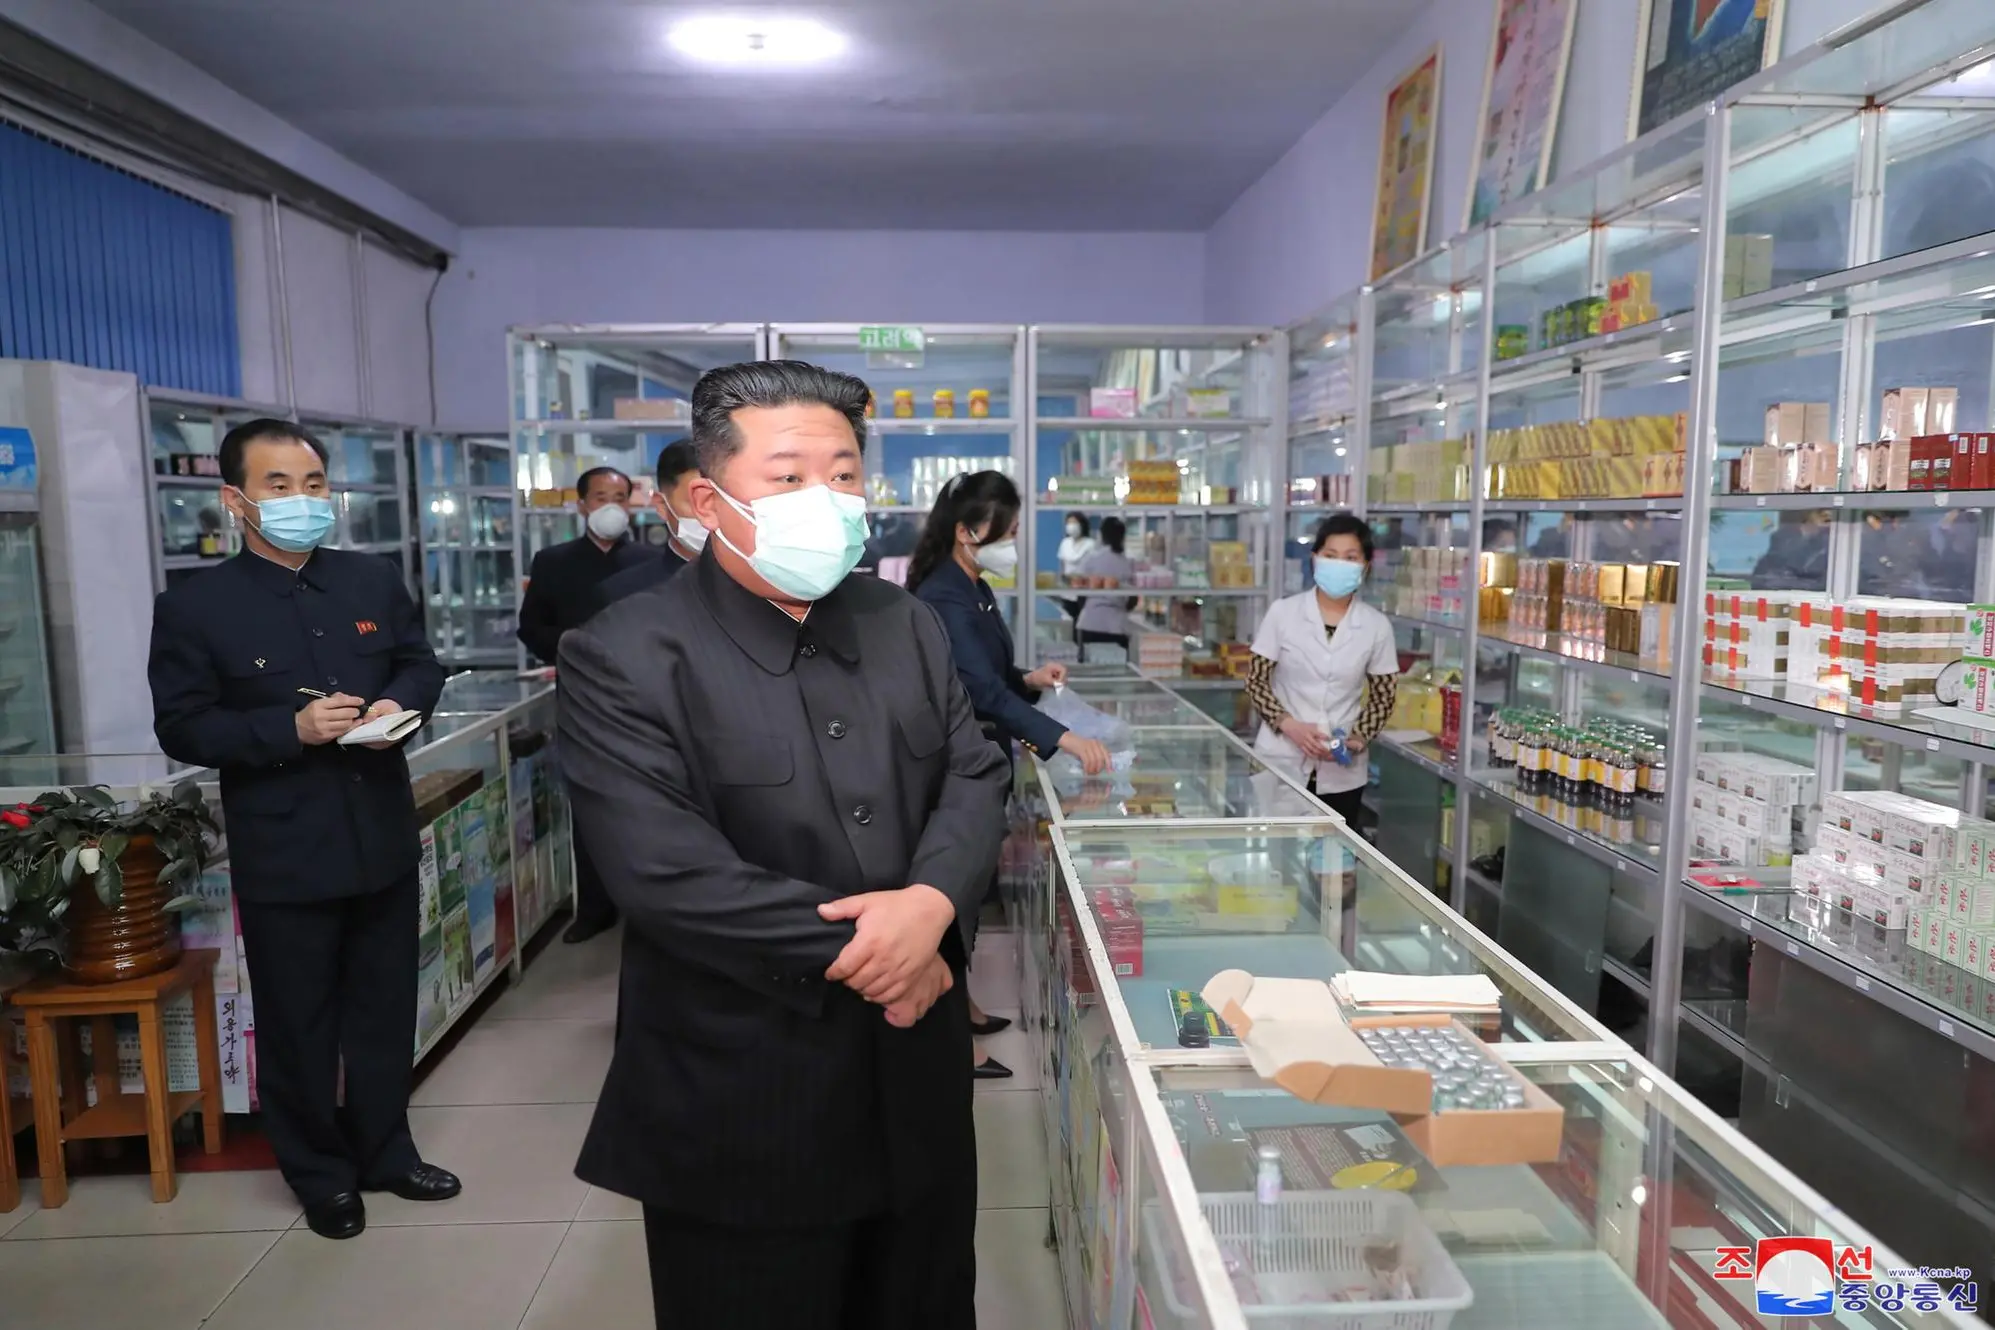 epa09950076 A photo released by the official North Korean Central News Agency (KCNA) shows North Korean leader Kim Jong-un (C) wearing a face mask while inspecting a pharmacy in Pyongyang, North Korea, 15 May 2022 (issued 16 May 2022). On 15 May, Kim held an emergency consultative meeting of the political bureau of the Workers' Party at the headquarters of the party's Central Committee in Pyongyang. In the meeting, Kim ordered the mobilization of soldiers to stabilize the supply of medicine in the capital. EPA/KCNA EDITORIAL USE ONLY